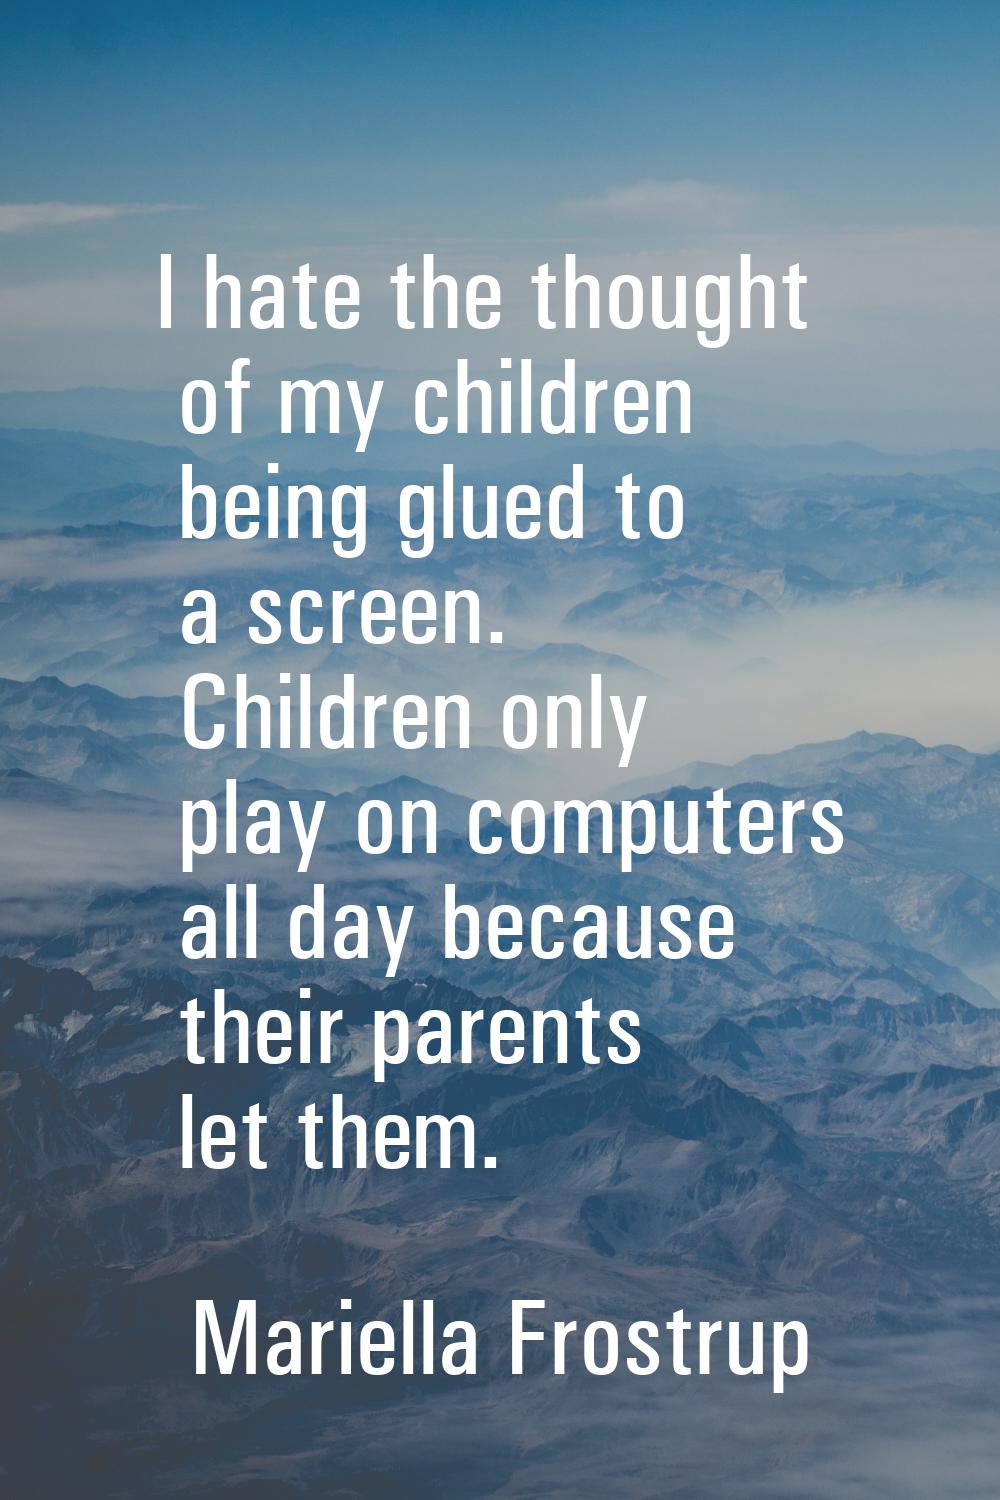 I hate the thought of my children being glued to a screen. Children only play on computers all day 